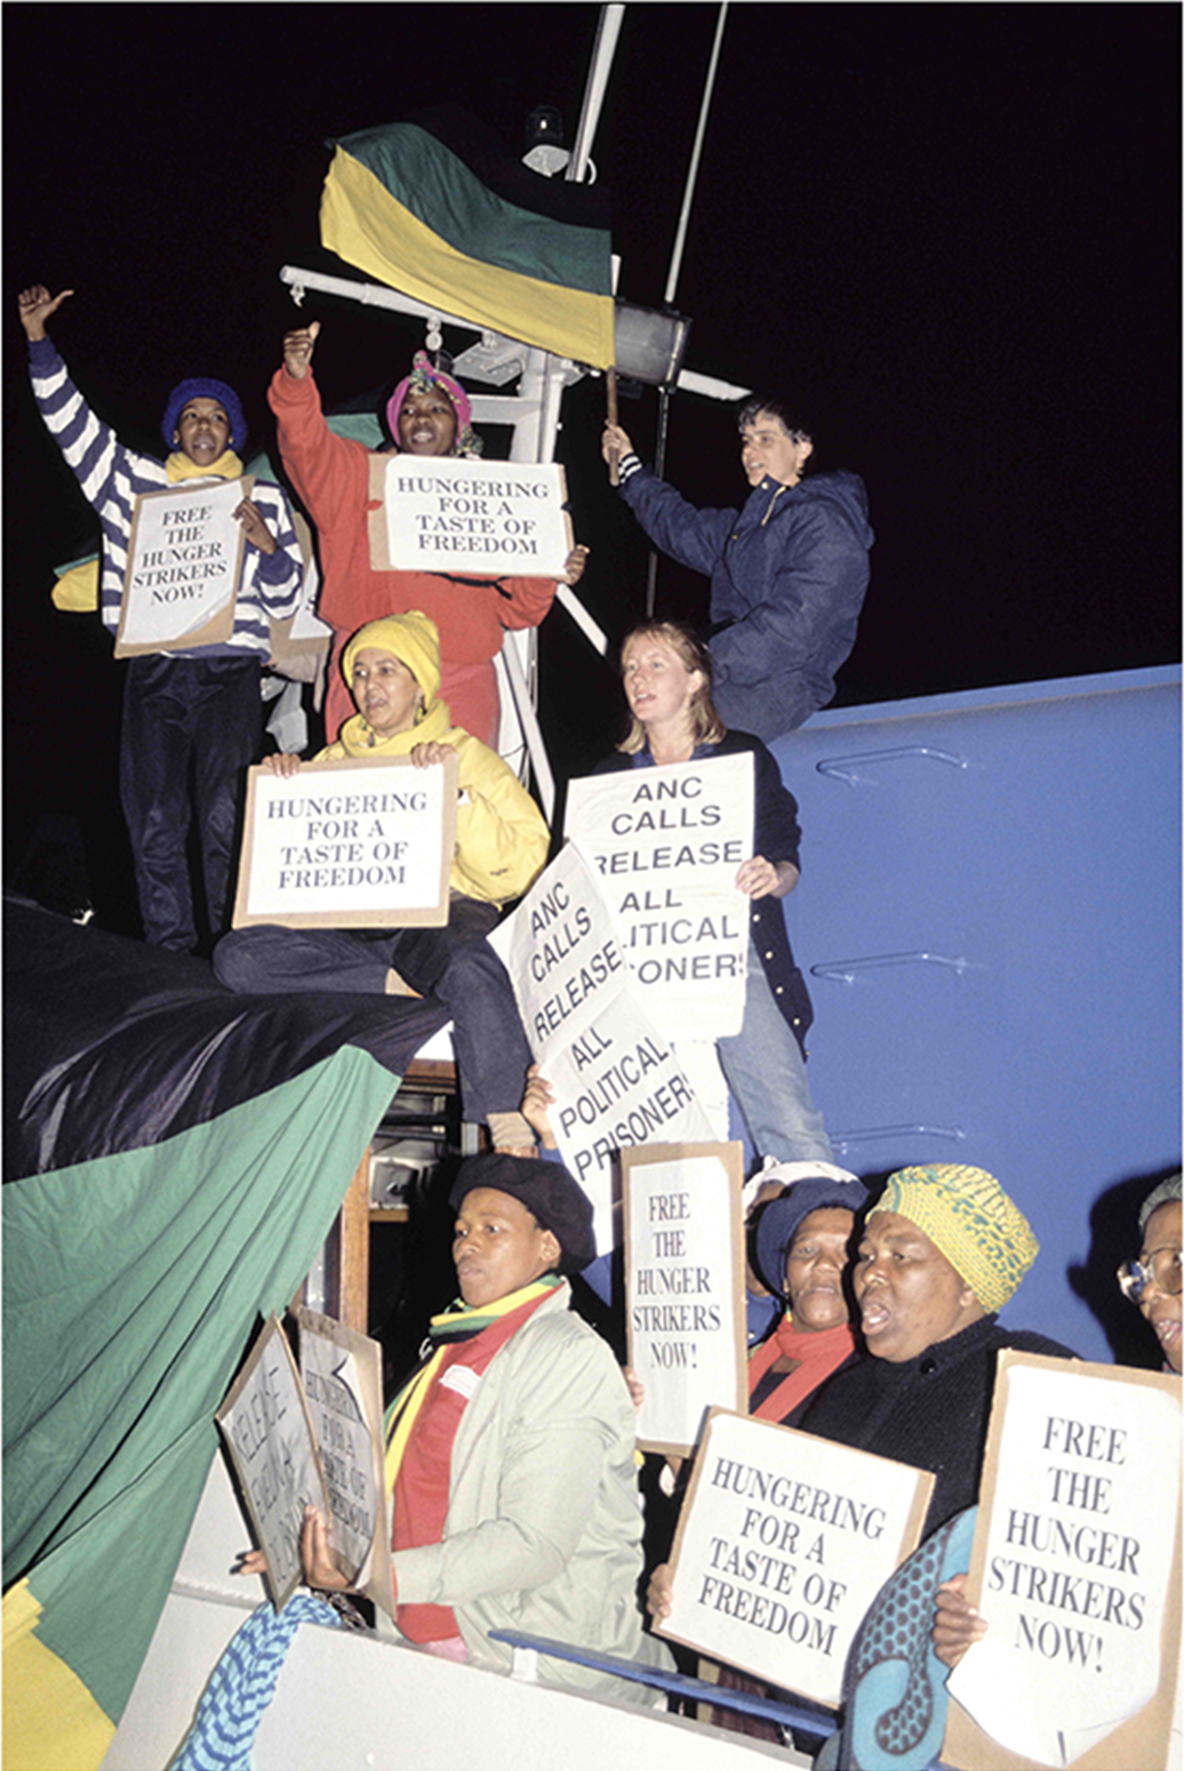 Relatives and supporters of the remaining Robben Island prisoners stage a demonstration on board a ferry to highlight the plight of hunger strikers on the island